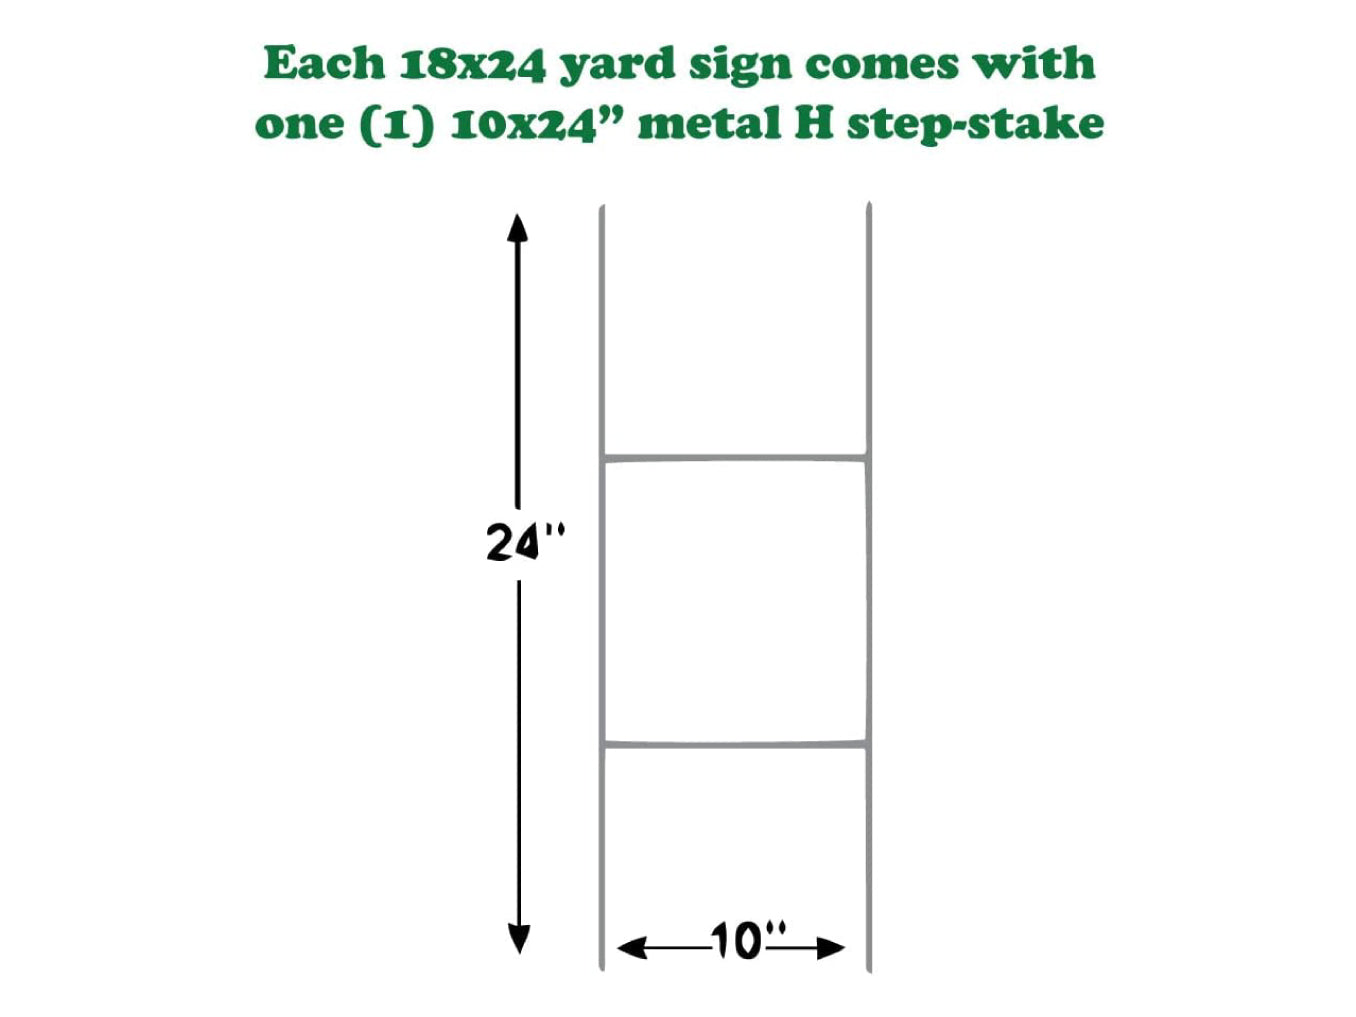 Community Garage Sale, Yard Sale Sign, 24x18 or 36x24 inch, Double Sided, H-Stake Included, v2